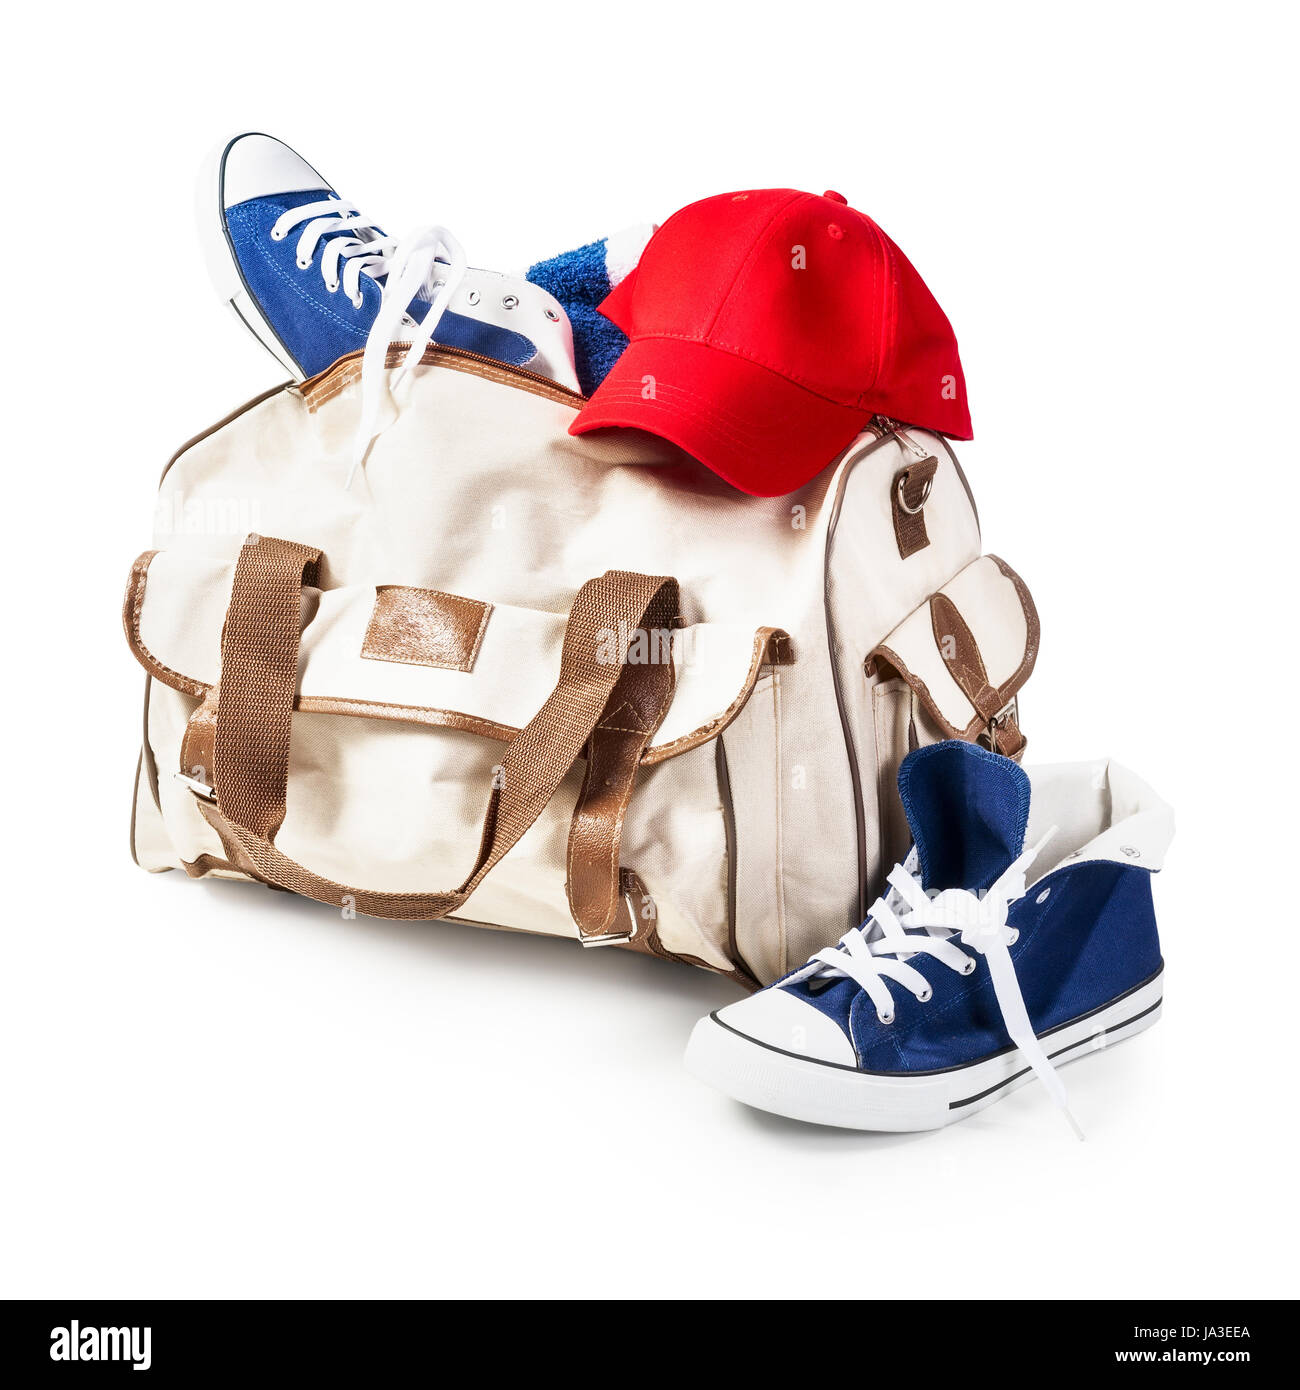 Bag with sport shoes and baseball cap isolated on white background clipping path included. Healthy lifestyle concept Stock Photo